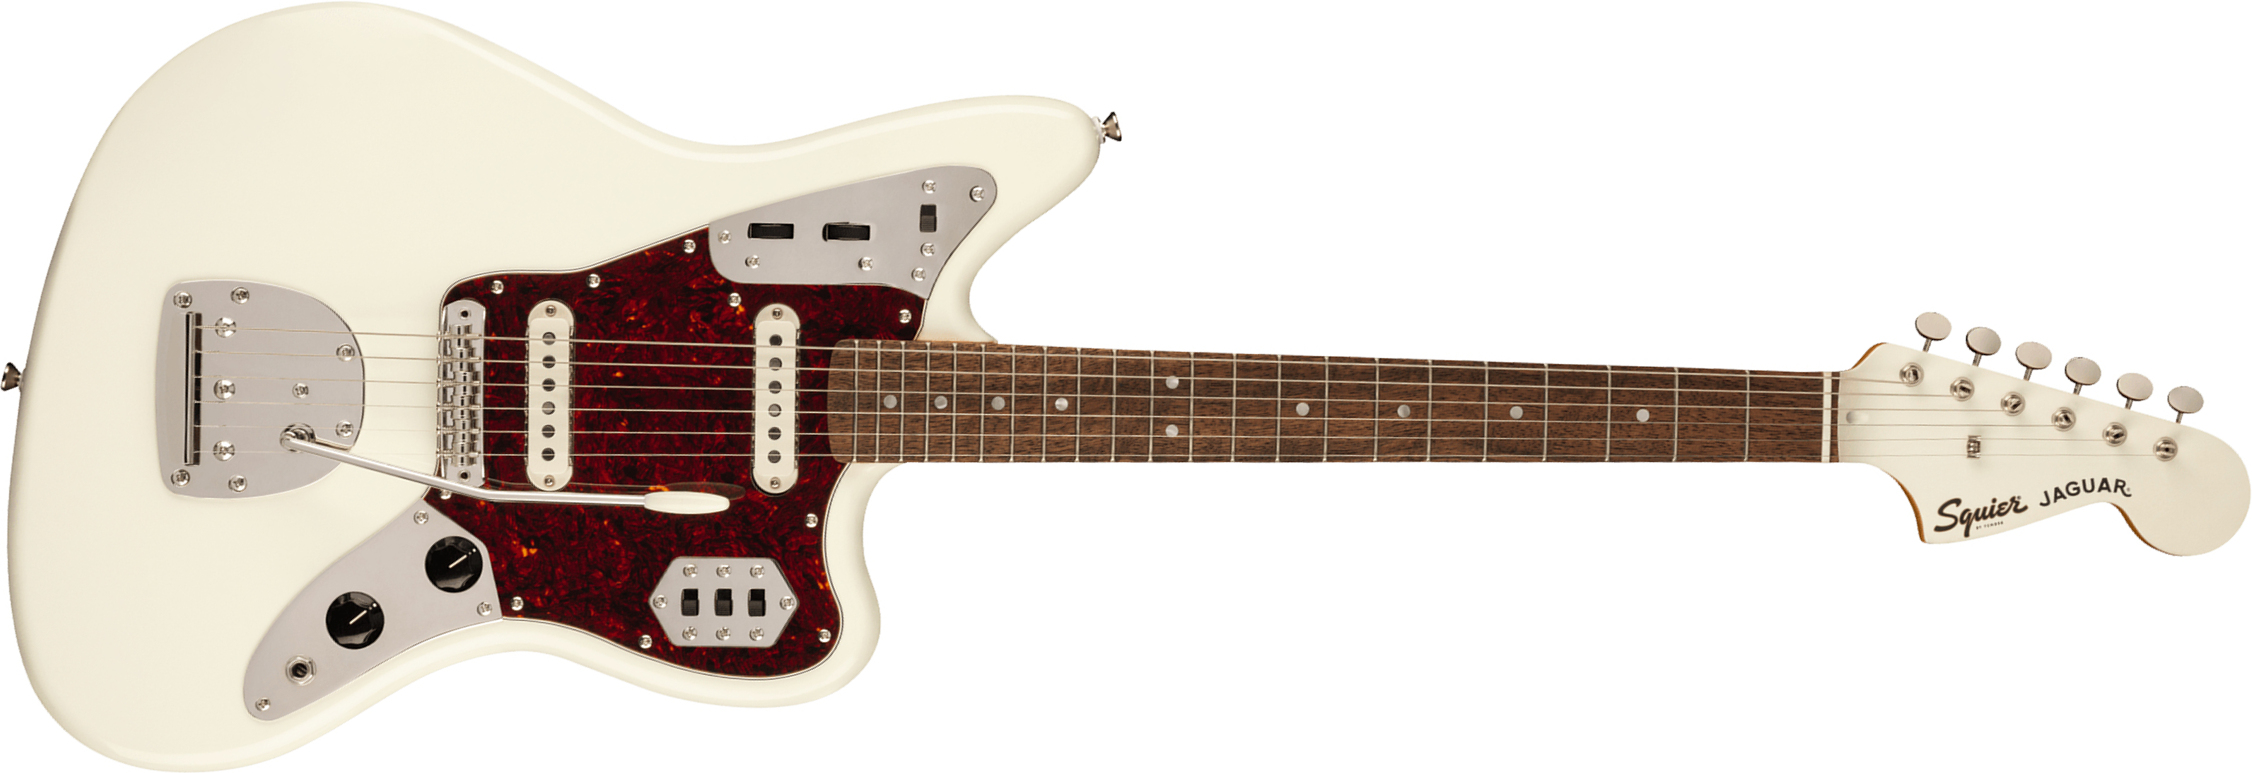 Squier Jaguar Classic Vibe 60s Fsr Ltd Lau - Olympic White With Matching Headstock - Retro rock electric guitar - Main picture